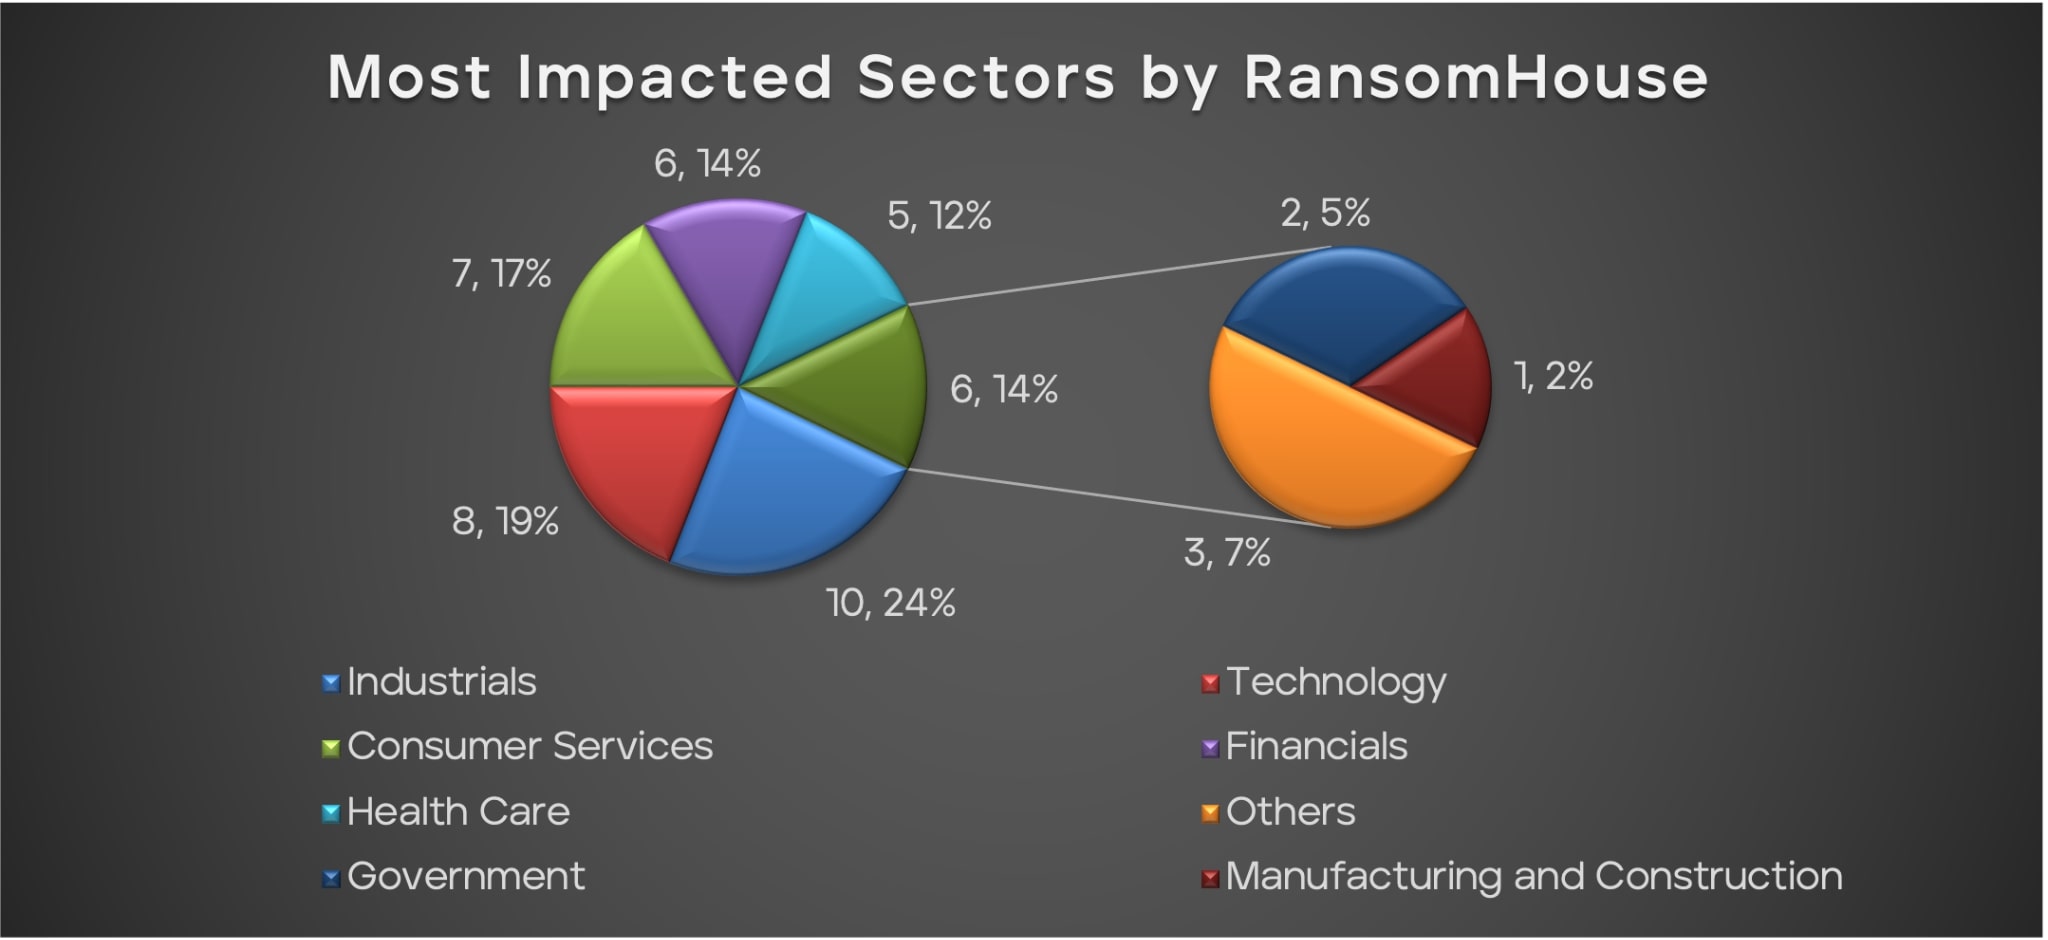 Figure 11 - The most impacted sectors by RansomHouse, during the given timeframe